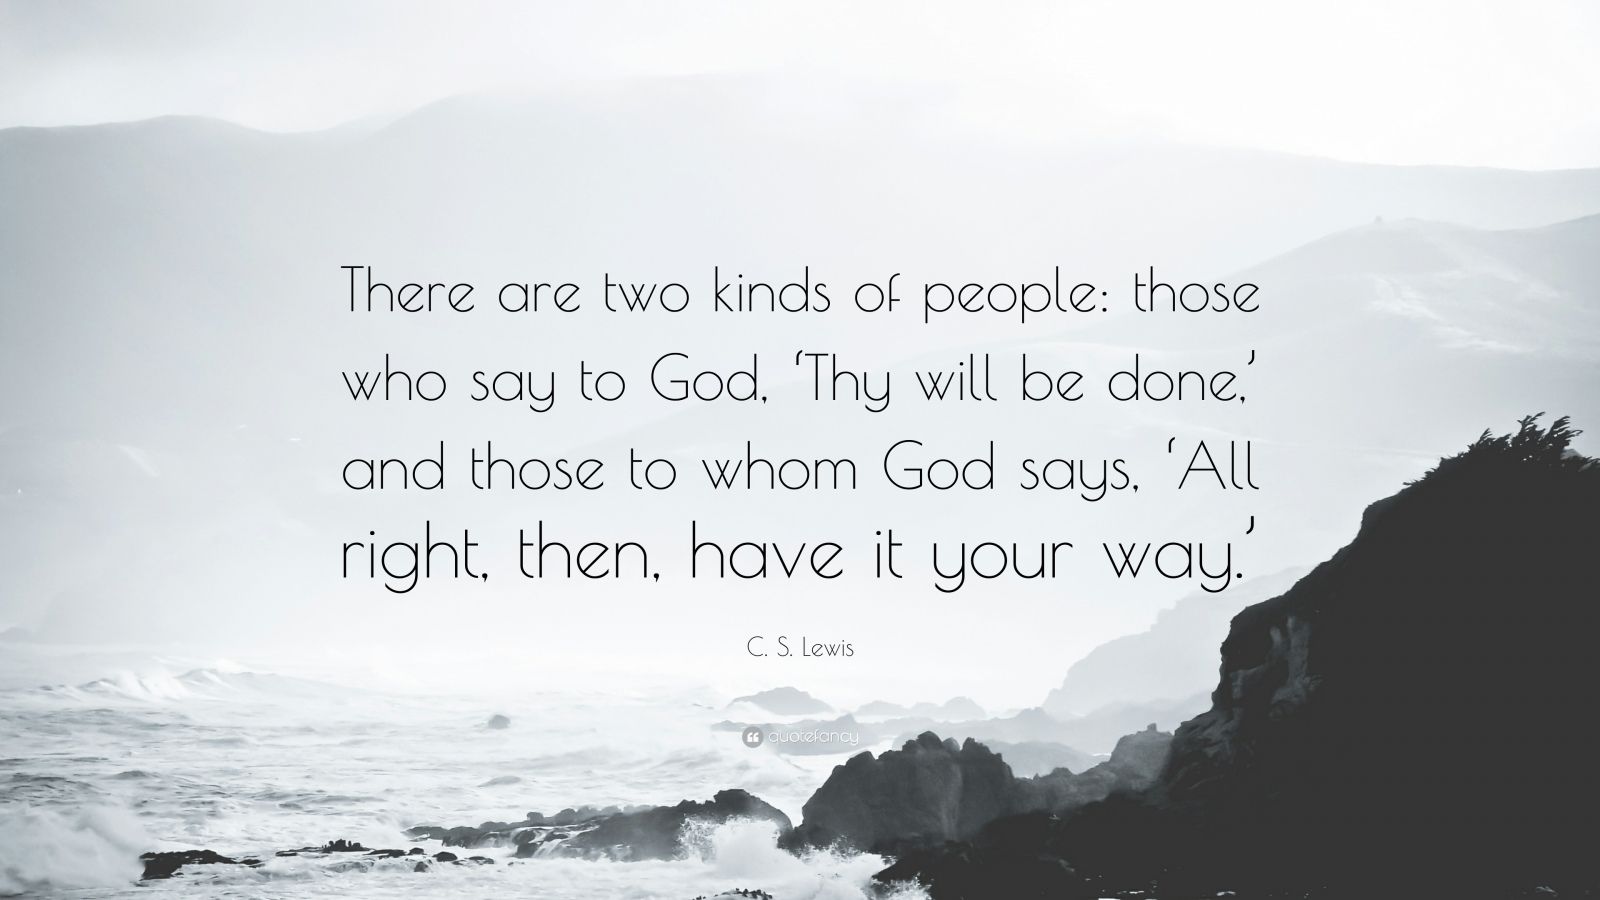 C. S. Lewis Quote: “There are two kinds of people: those who say to God